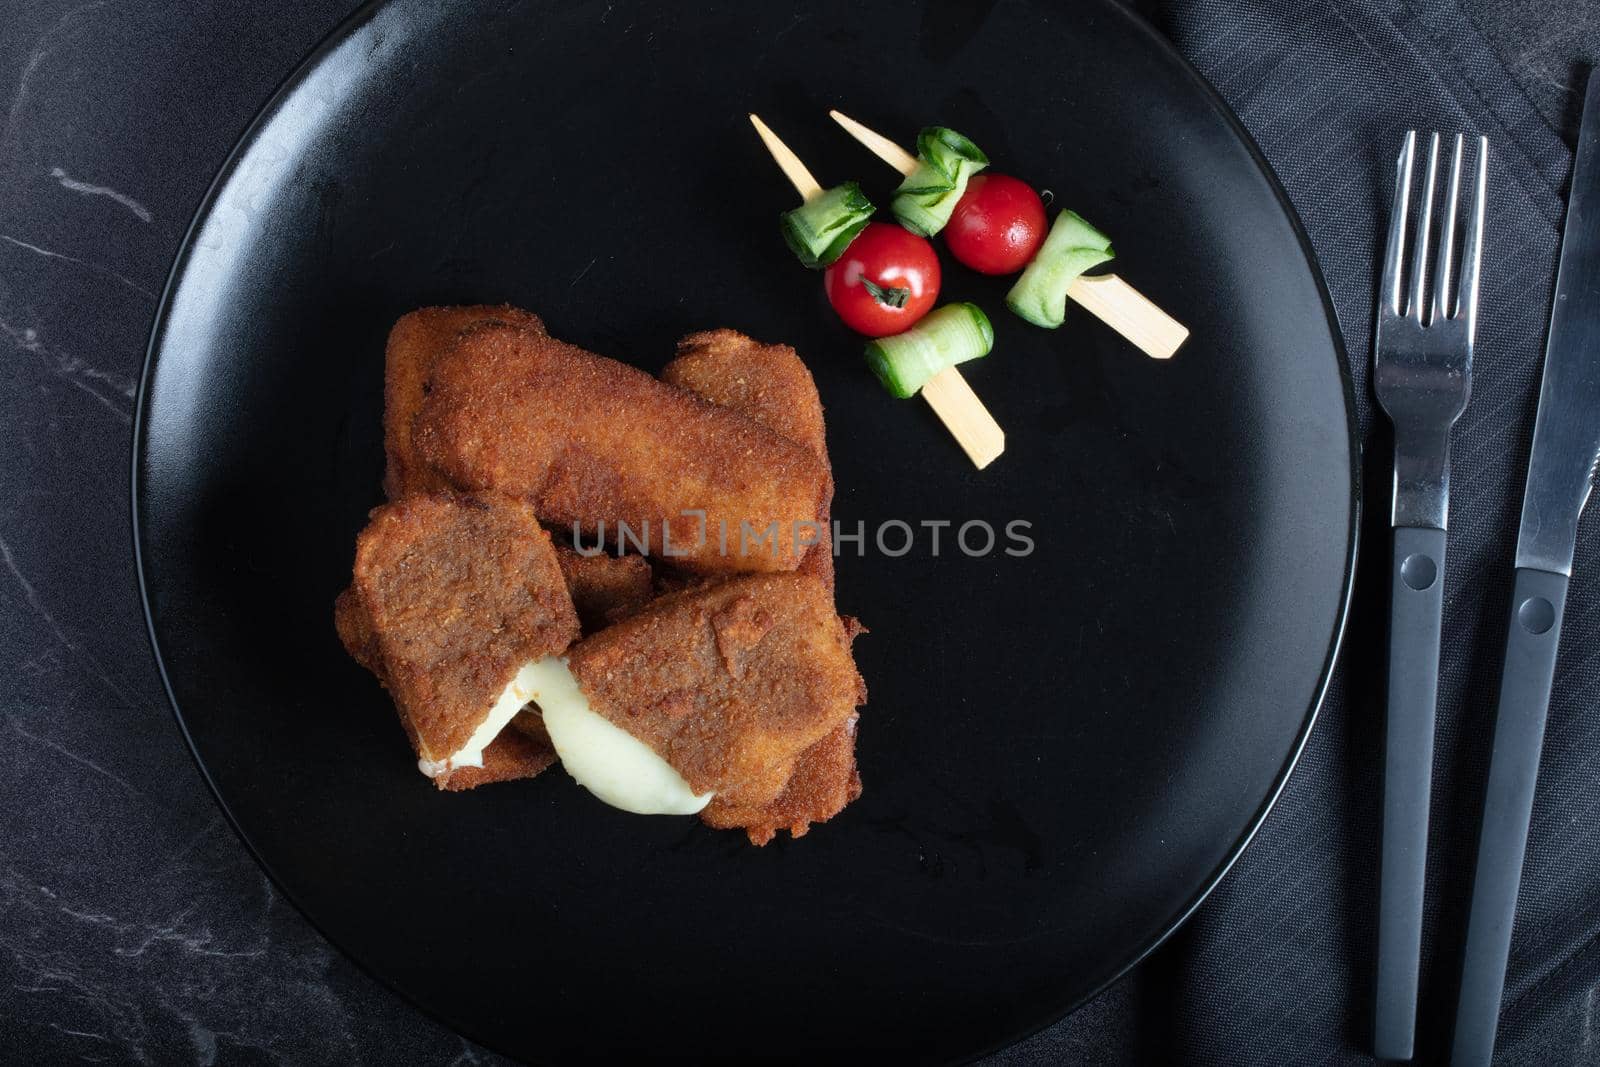 Cordon bleu speciality (rolls with chicken breast, cheddar cheese). High quality photo